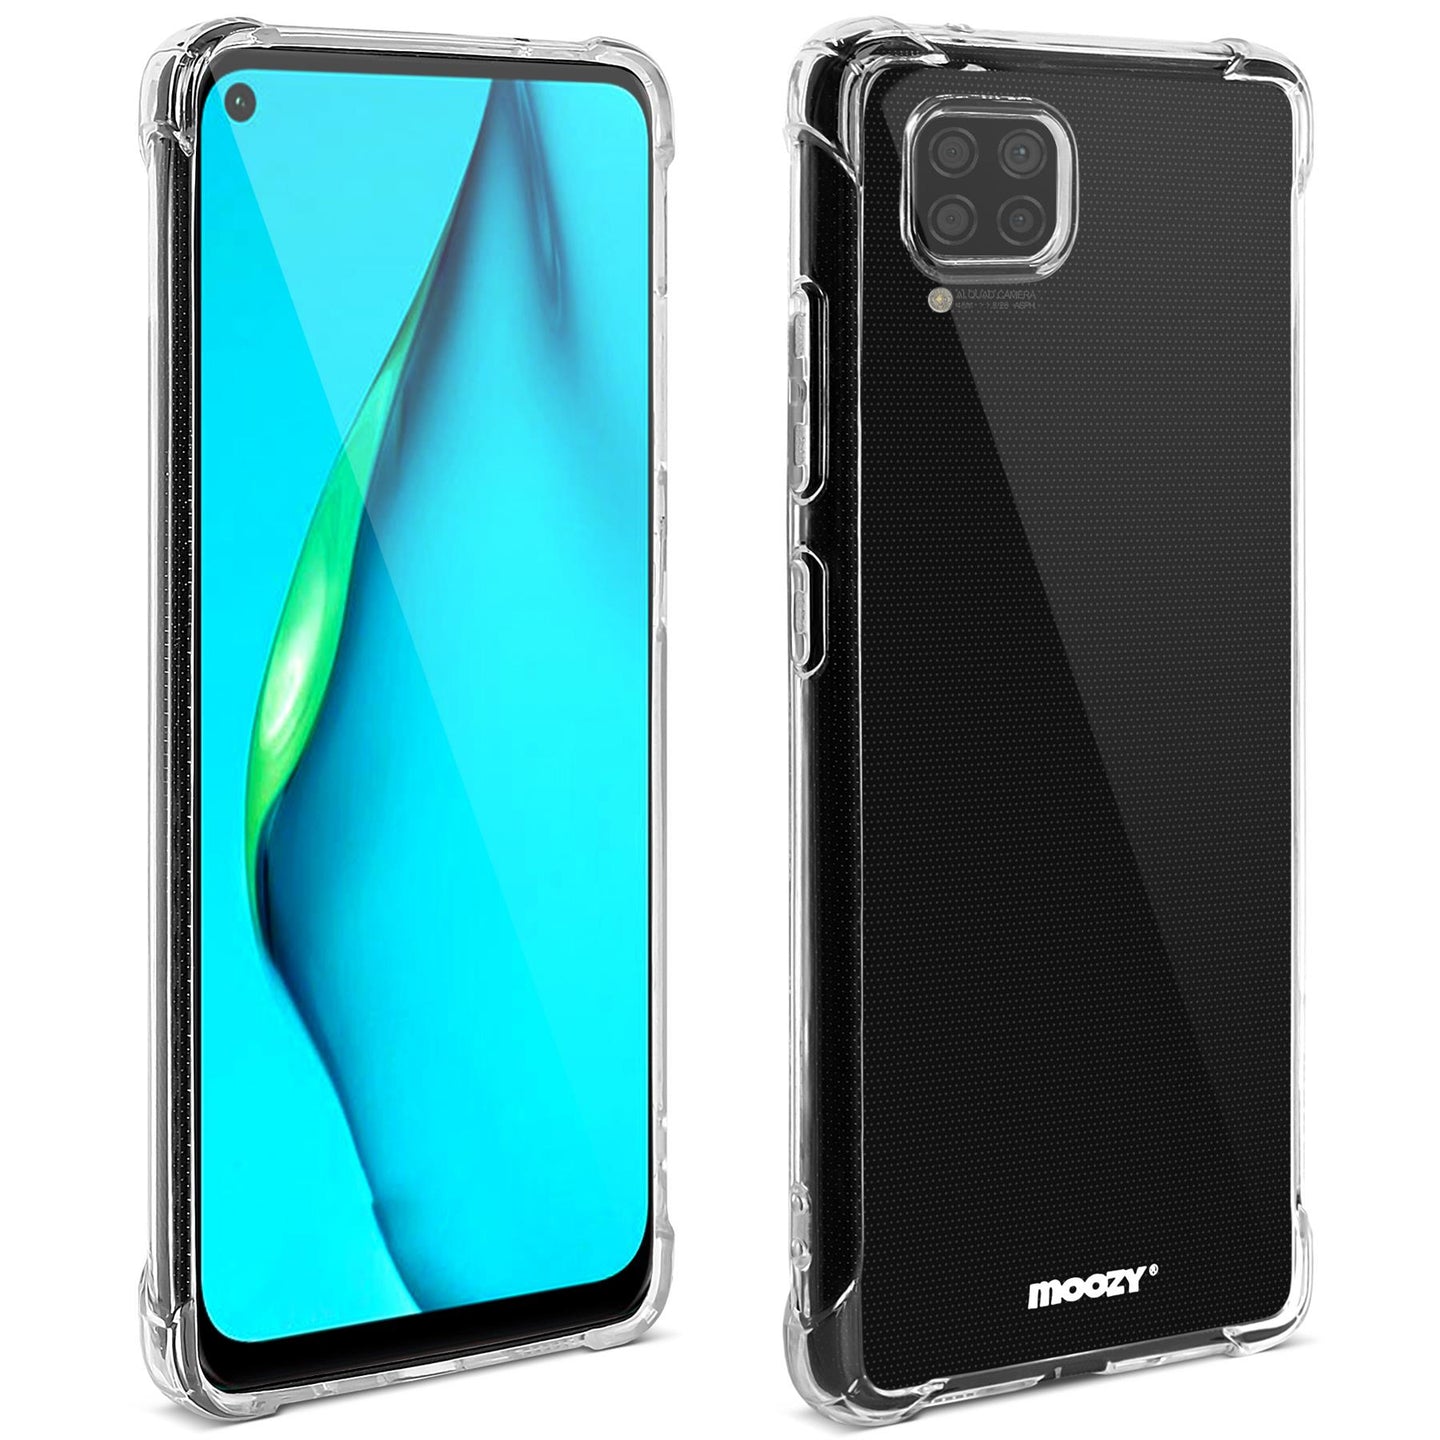 Moozy Shock Proof Silicone Case for Huawei P40 Lite - Transparent Crystal Clear Phone Case Soft TPU Cover